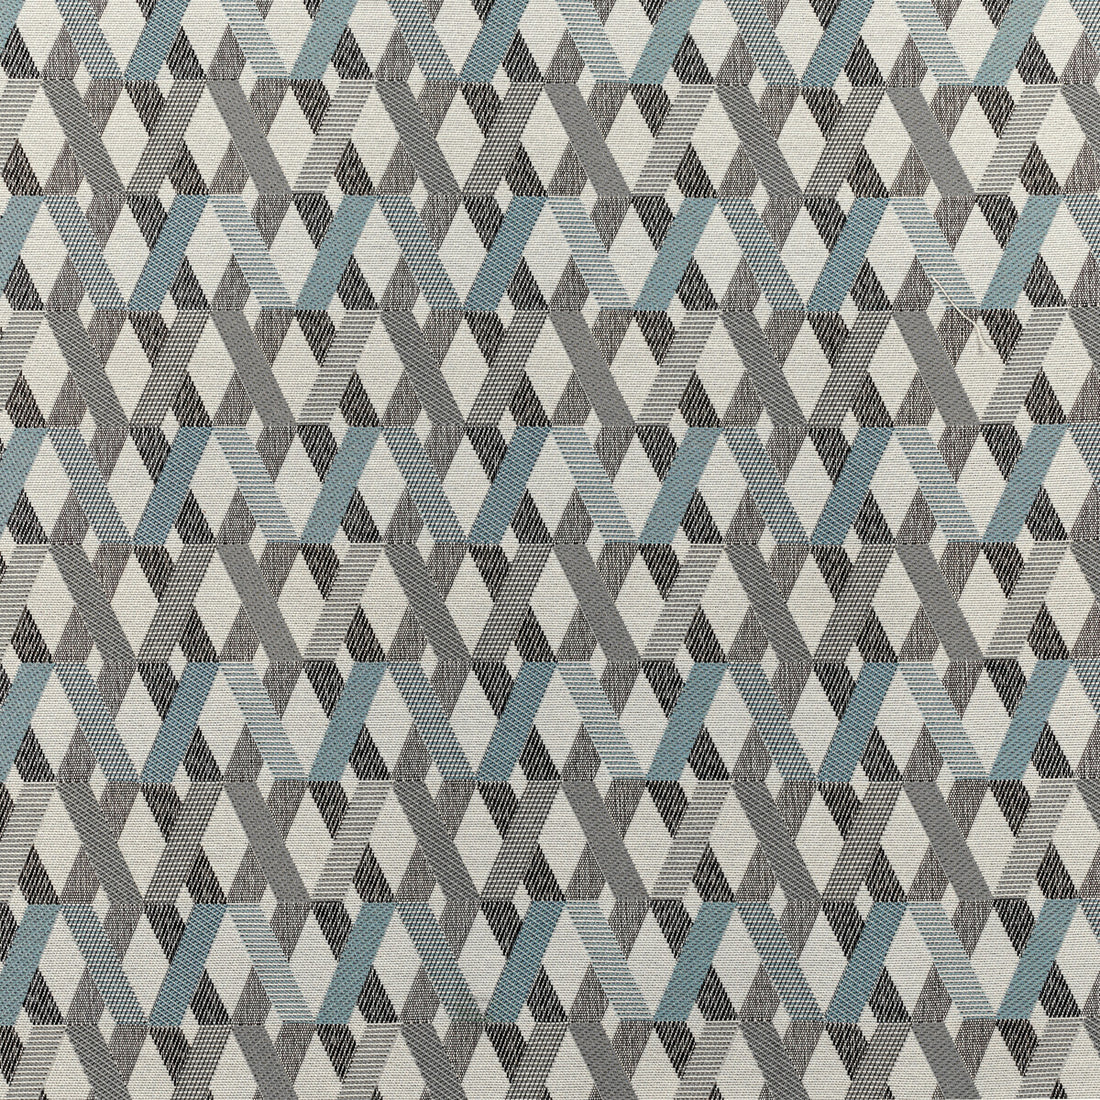 Bridgework fabric in daydream color - pattern 36276.511.0 - by Kravet Contract in the Gis Crypton collection